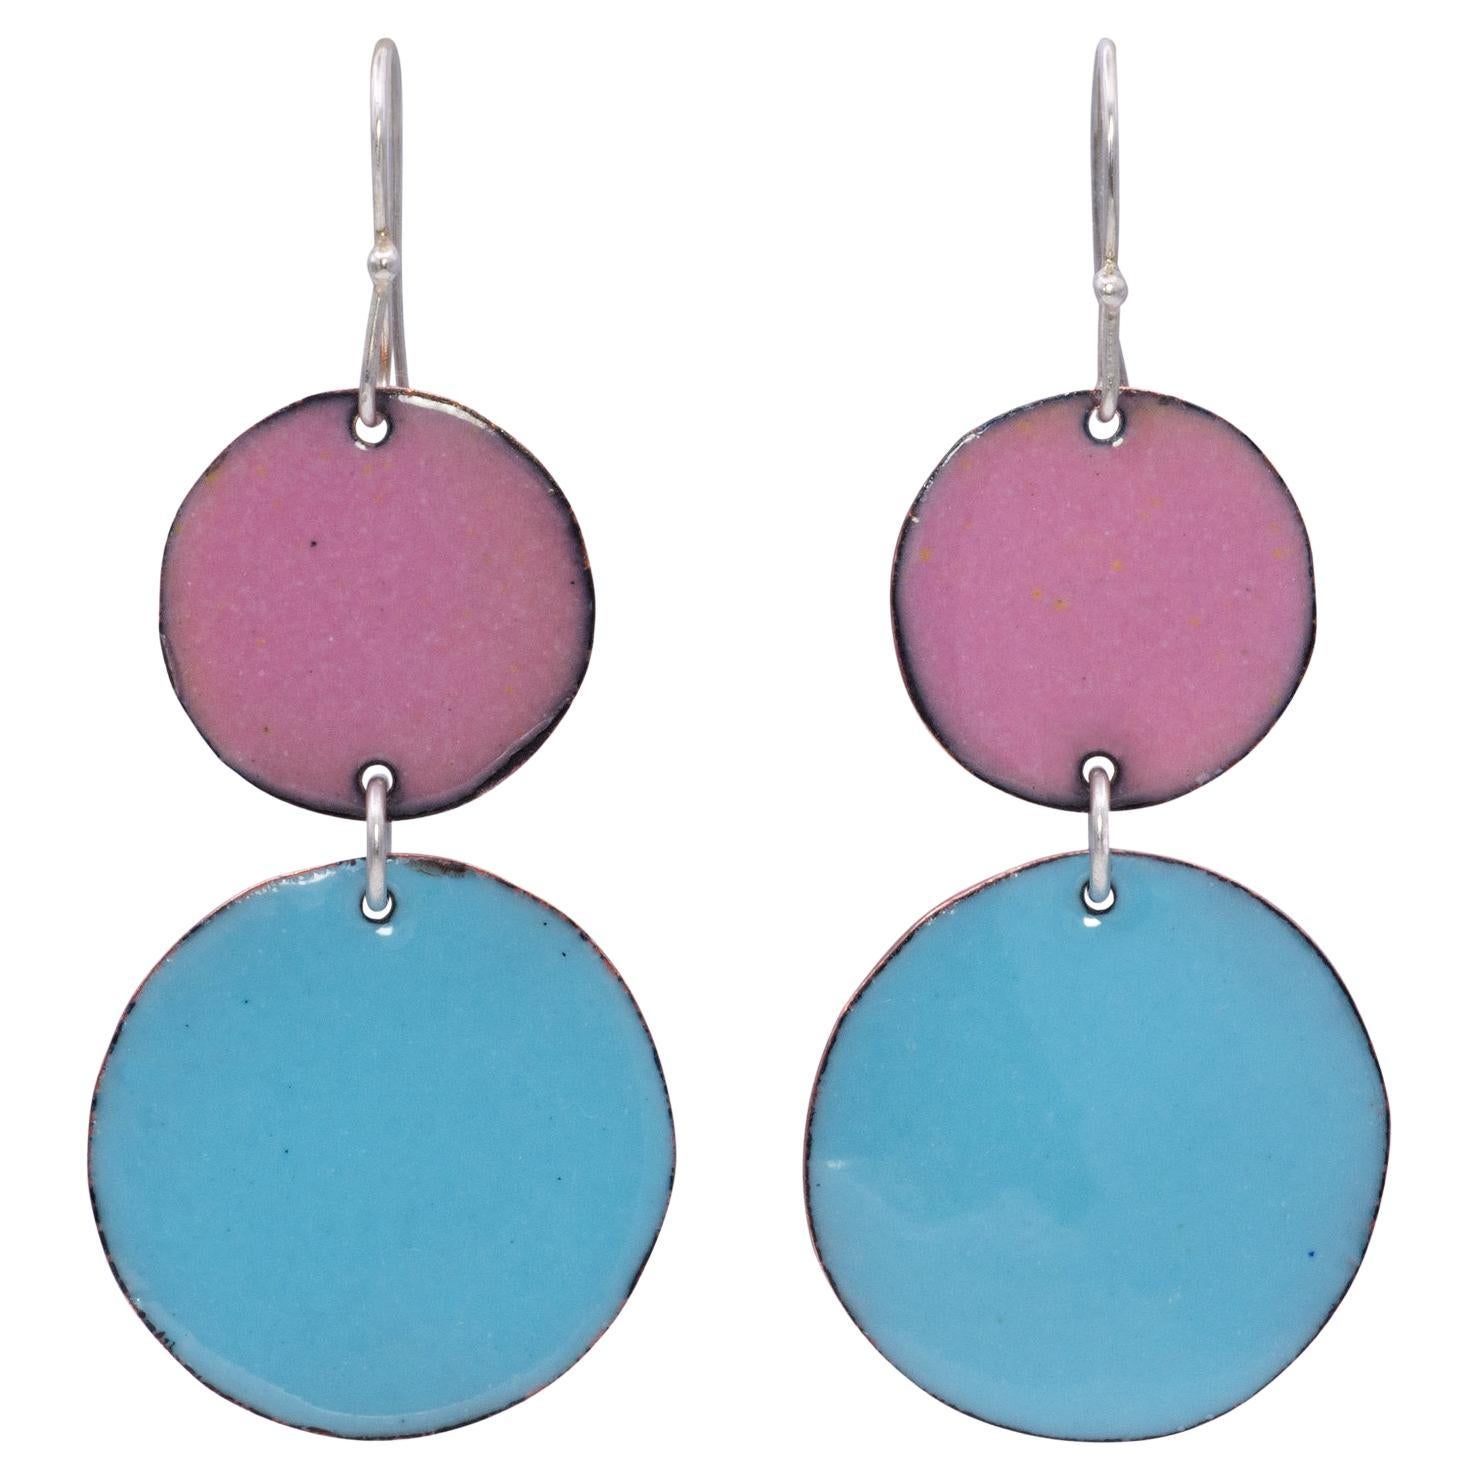 Bright Blue and Pink Hand Painted Copper Enamel Discs with Sterling Silver For Sale